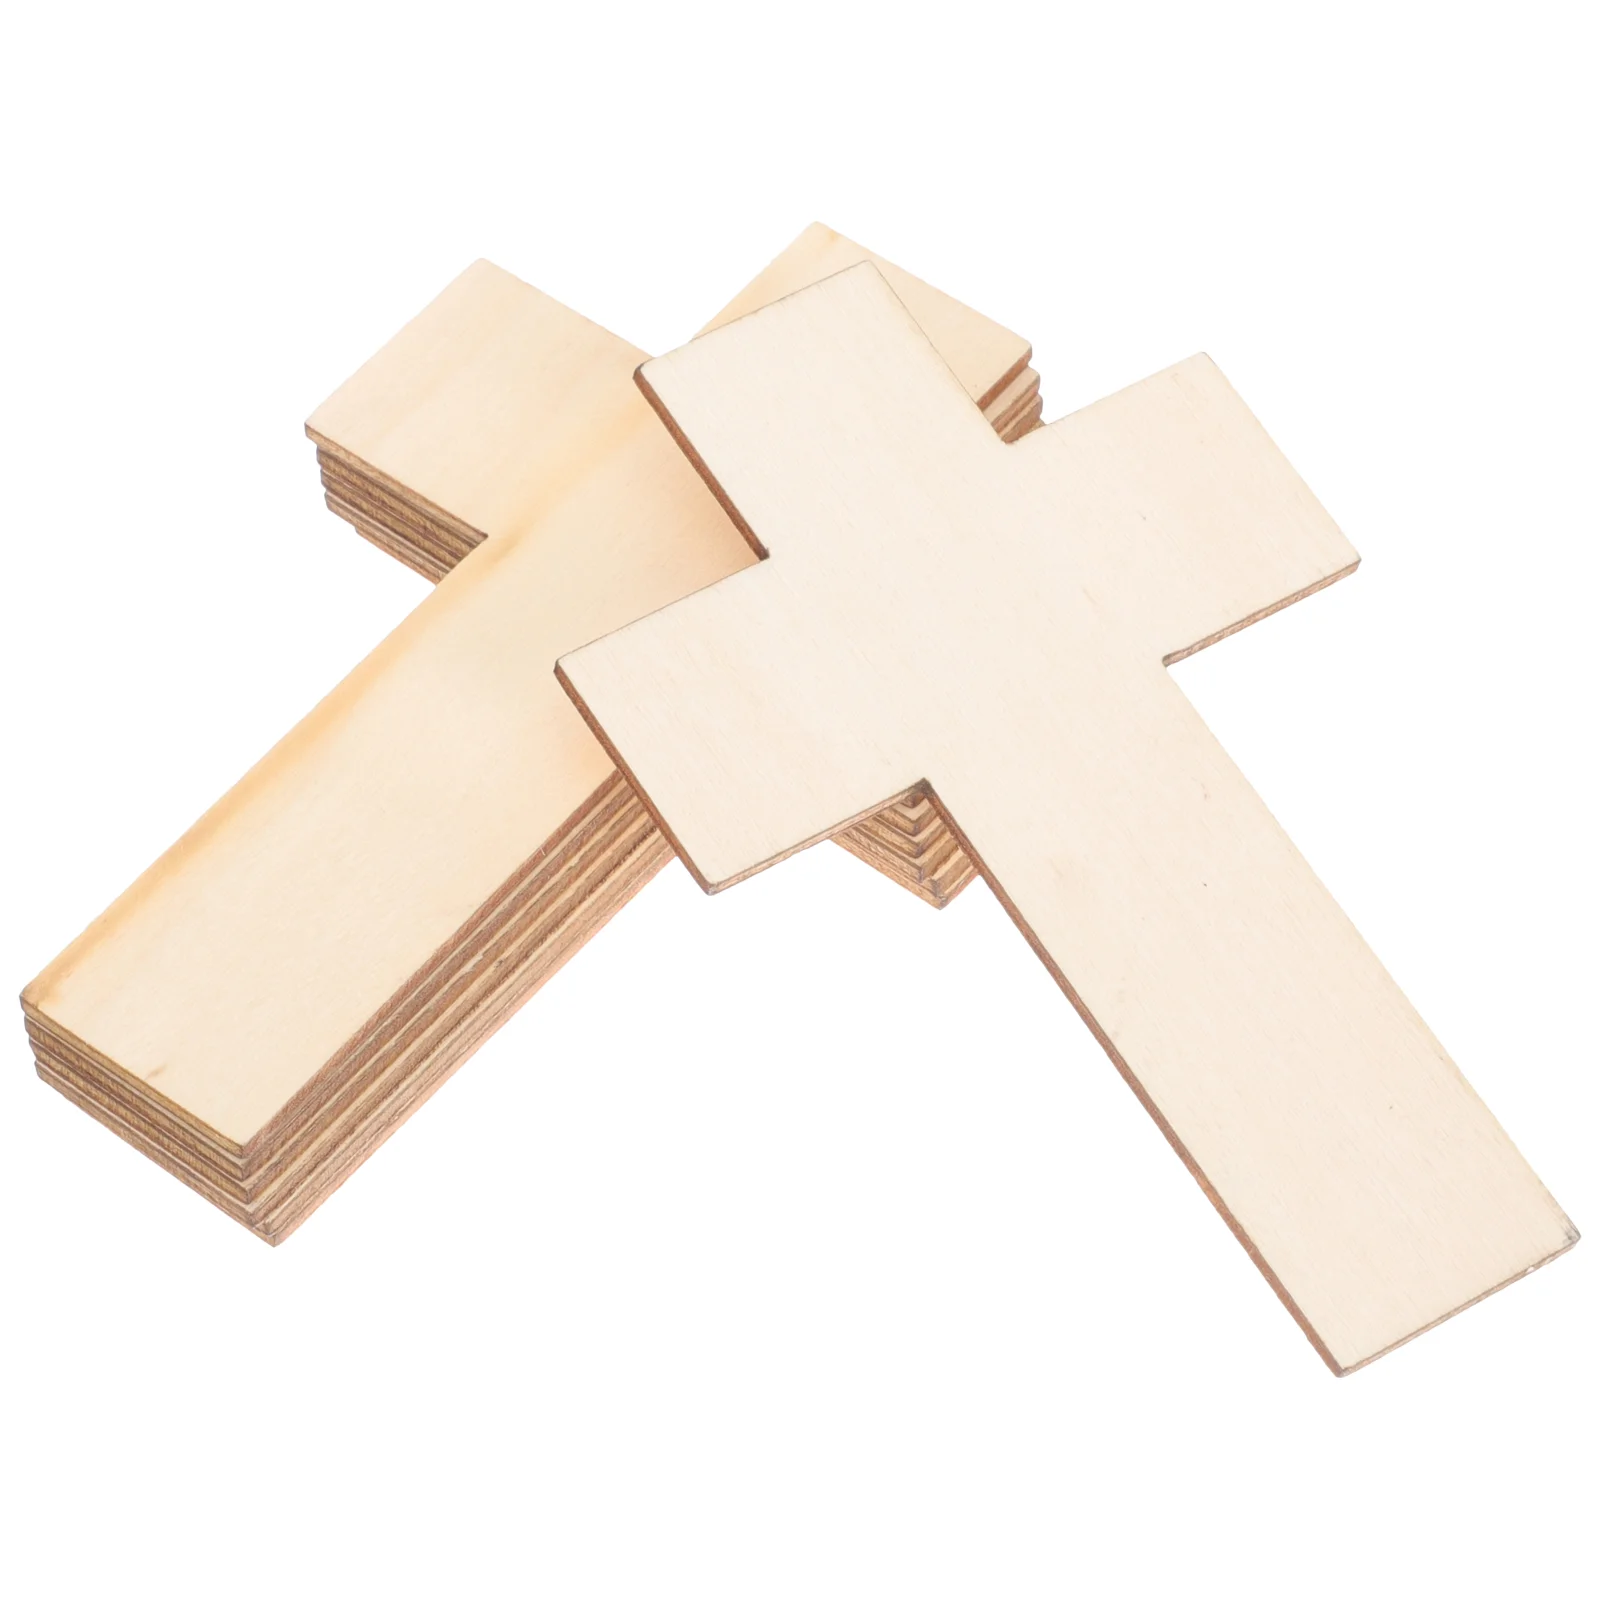 

Cross Wooden Wood Cutouts Crafts Slices Easter Unfinished Blank Shape Tags Cutout Diy Chips Catholic Pieces Craft Wall Religious